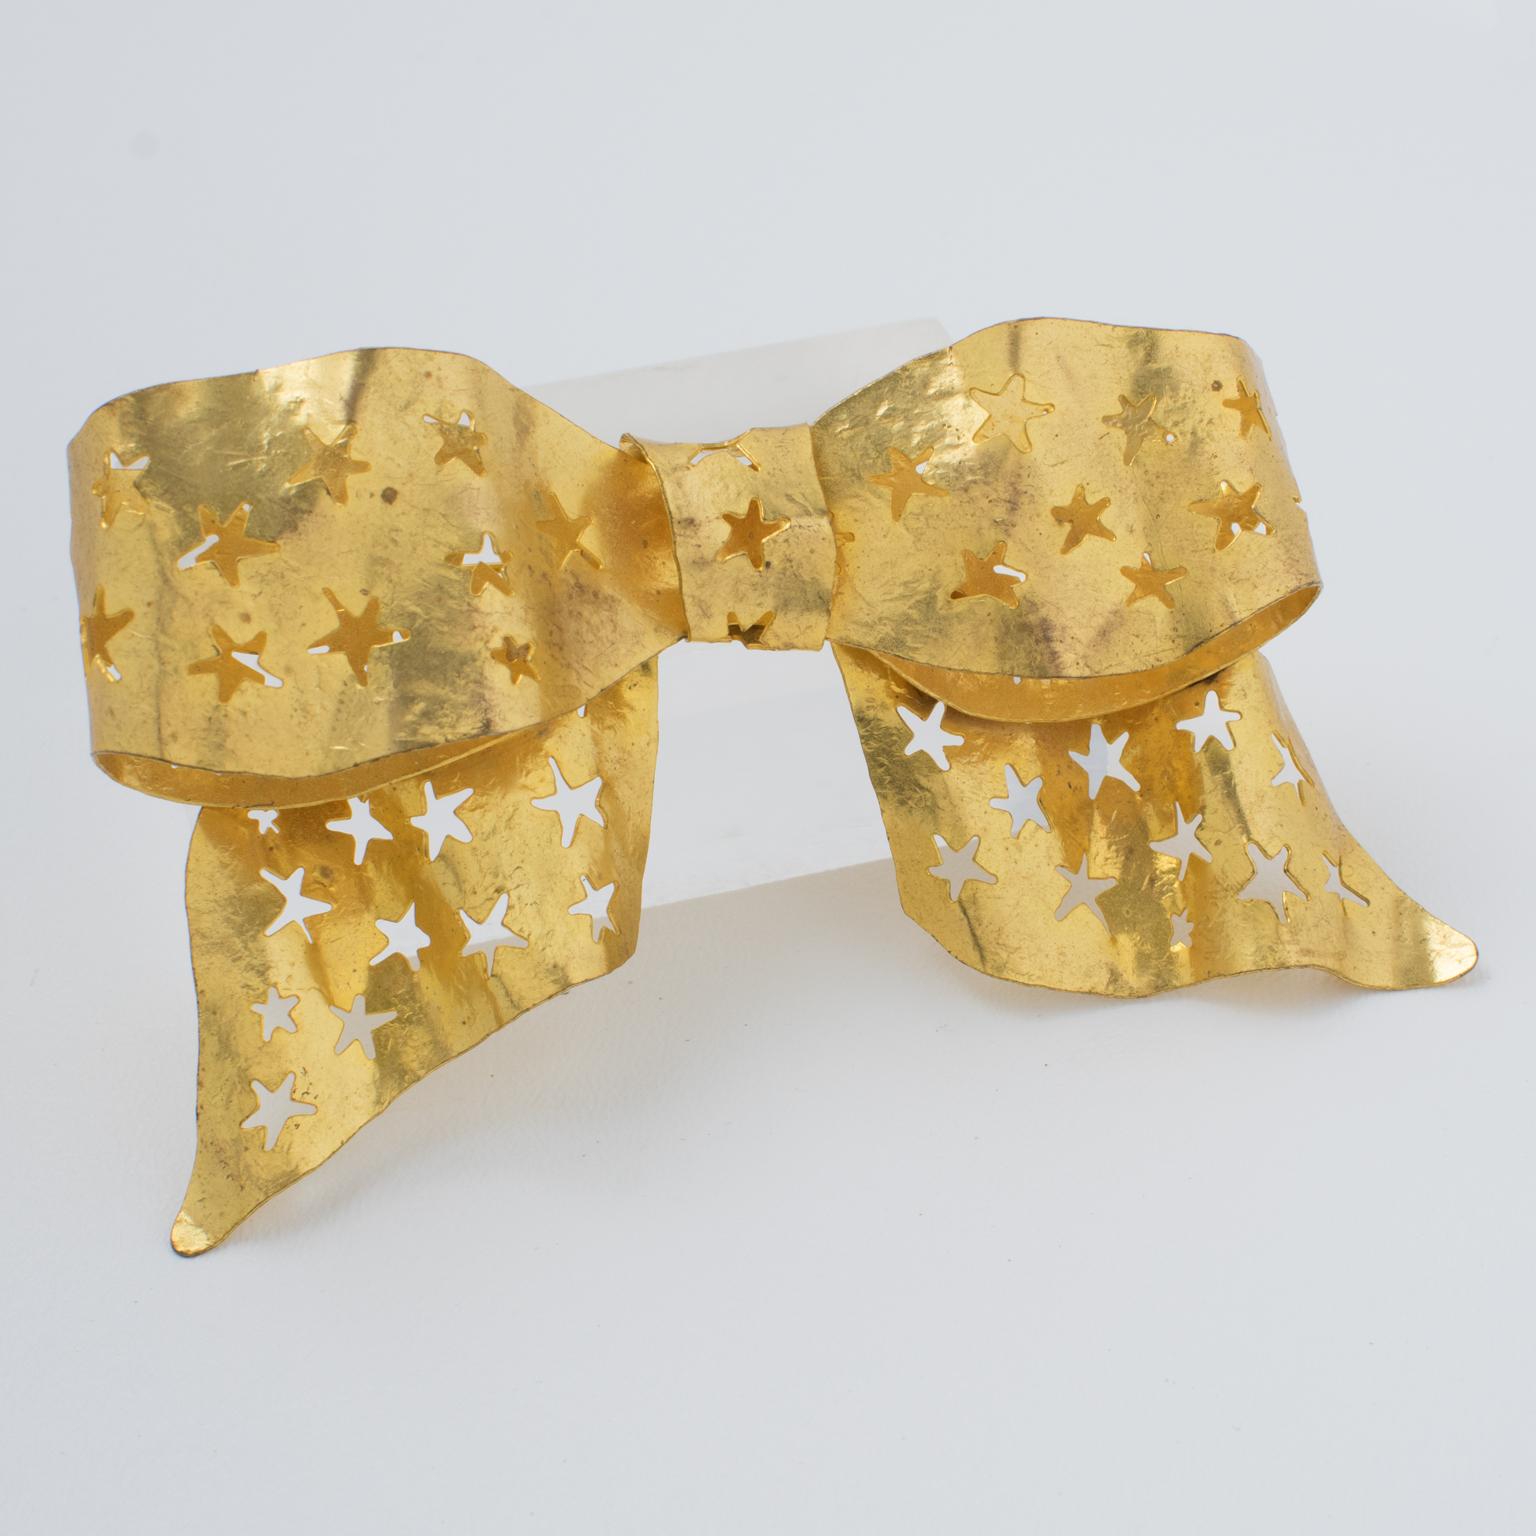 This stunning Sonia Rykiel Paris bowtie pin brooch features a dimensional massive bow shape with gilt metal all textured and with carved and see-thru stars. The piece is signed by famous French Jewel and Fashion Designer Sonia Rykiel, with a gilded